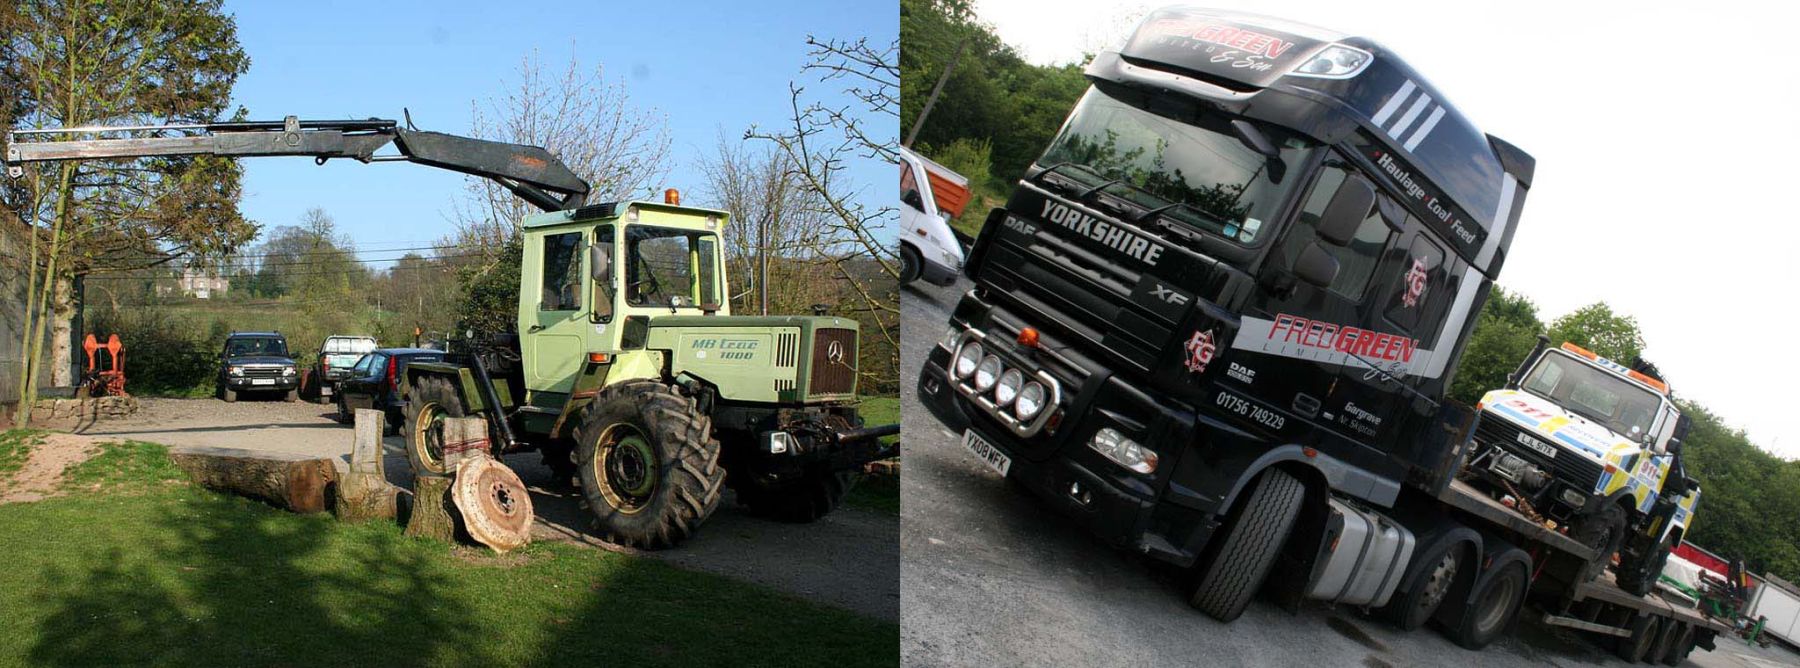 Mb Trac Trade-in for a Unimog U1000